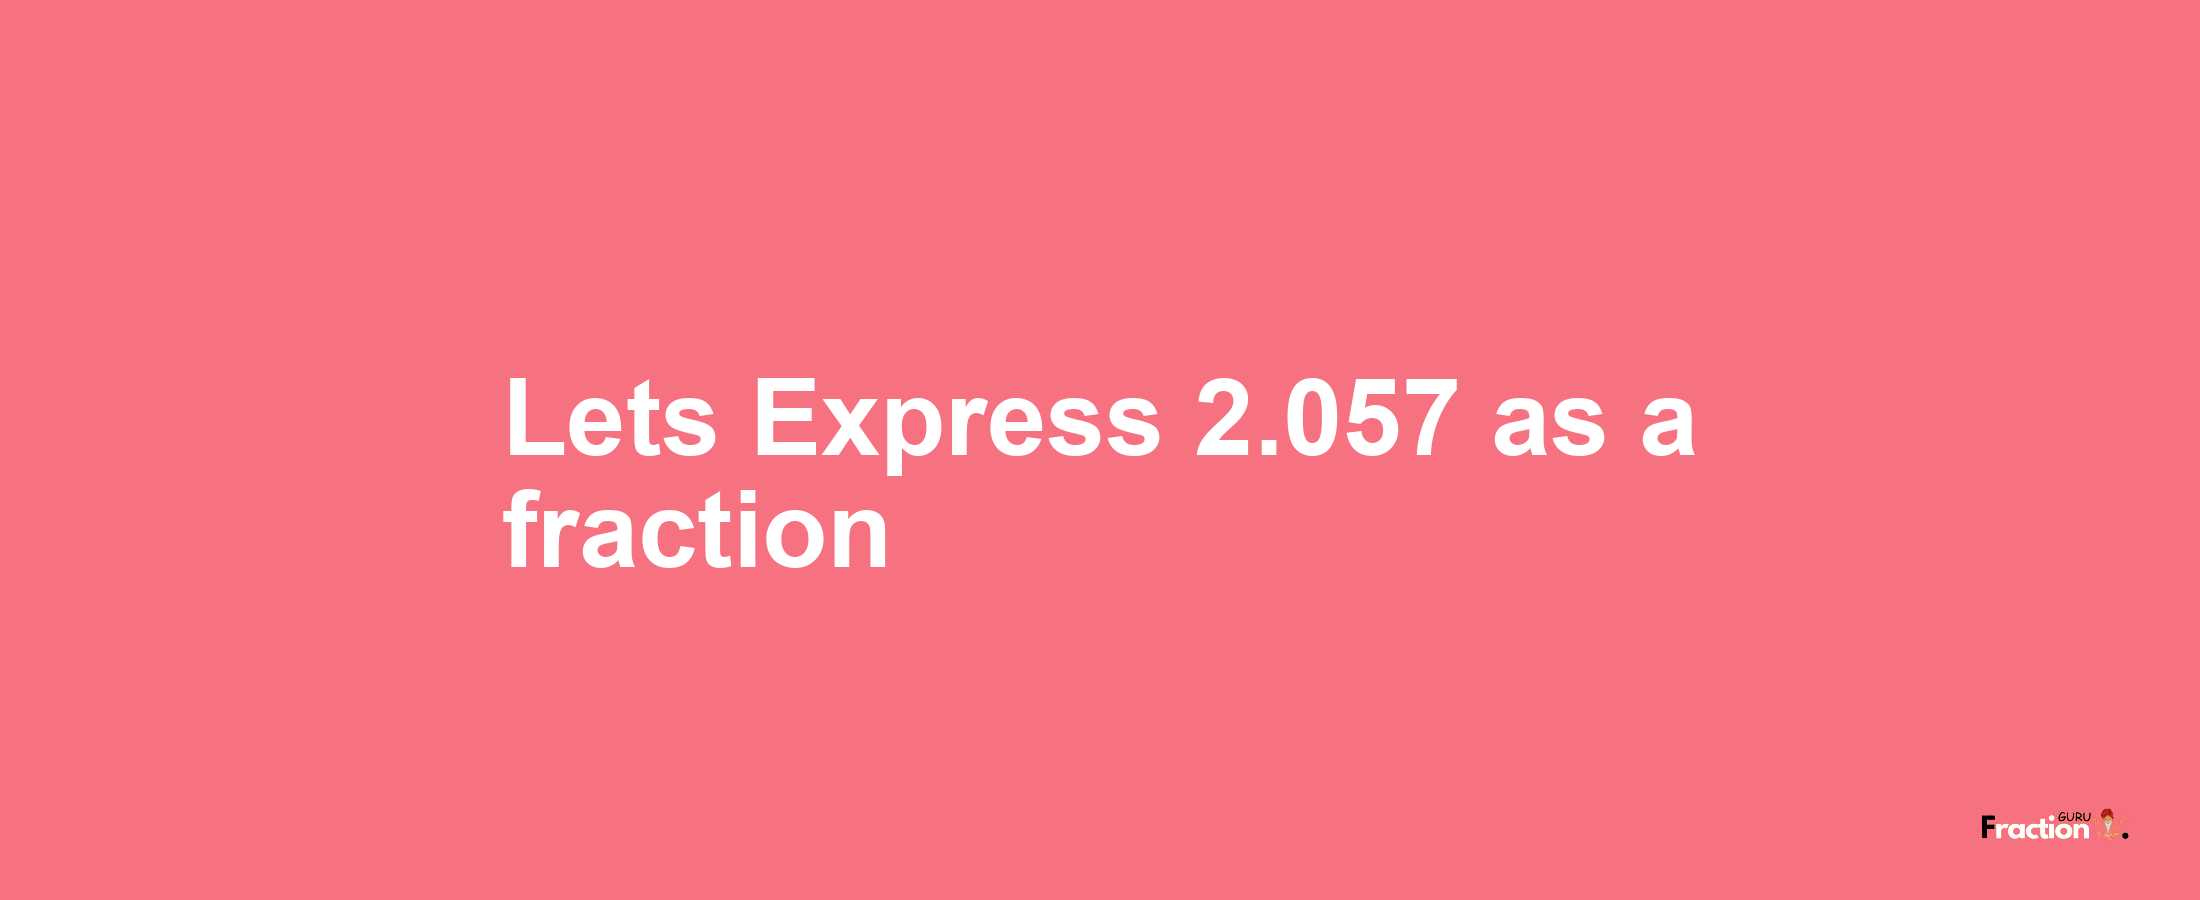 Lets Express 2.057 as afraction